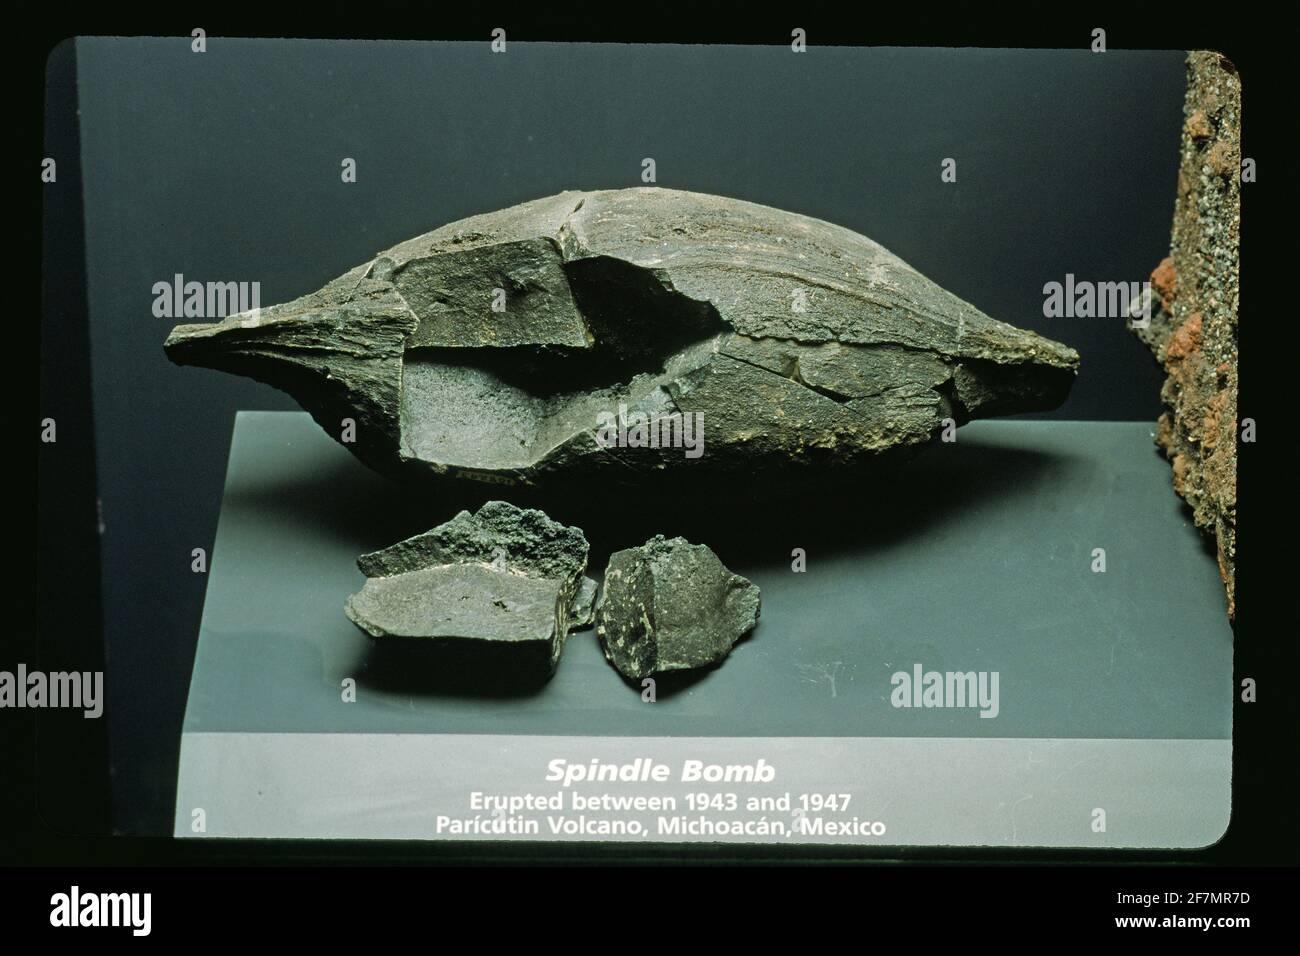 Volcanic bomb or spindle bomb from Paricutin Volcano eruption (1943 to 1947), Michoacan, Mexico Stock Photo